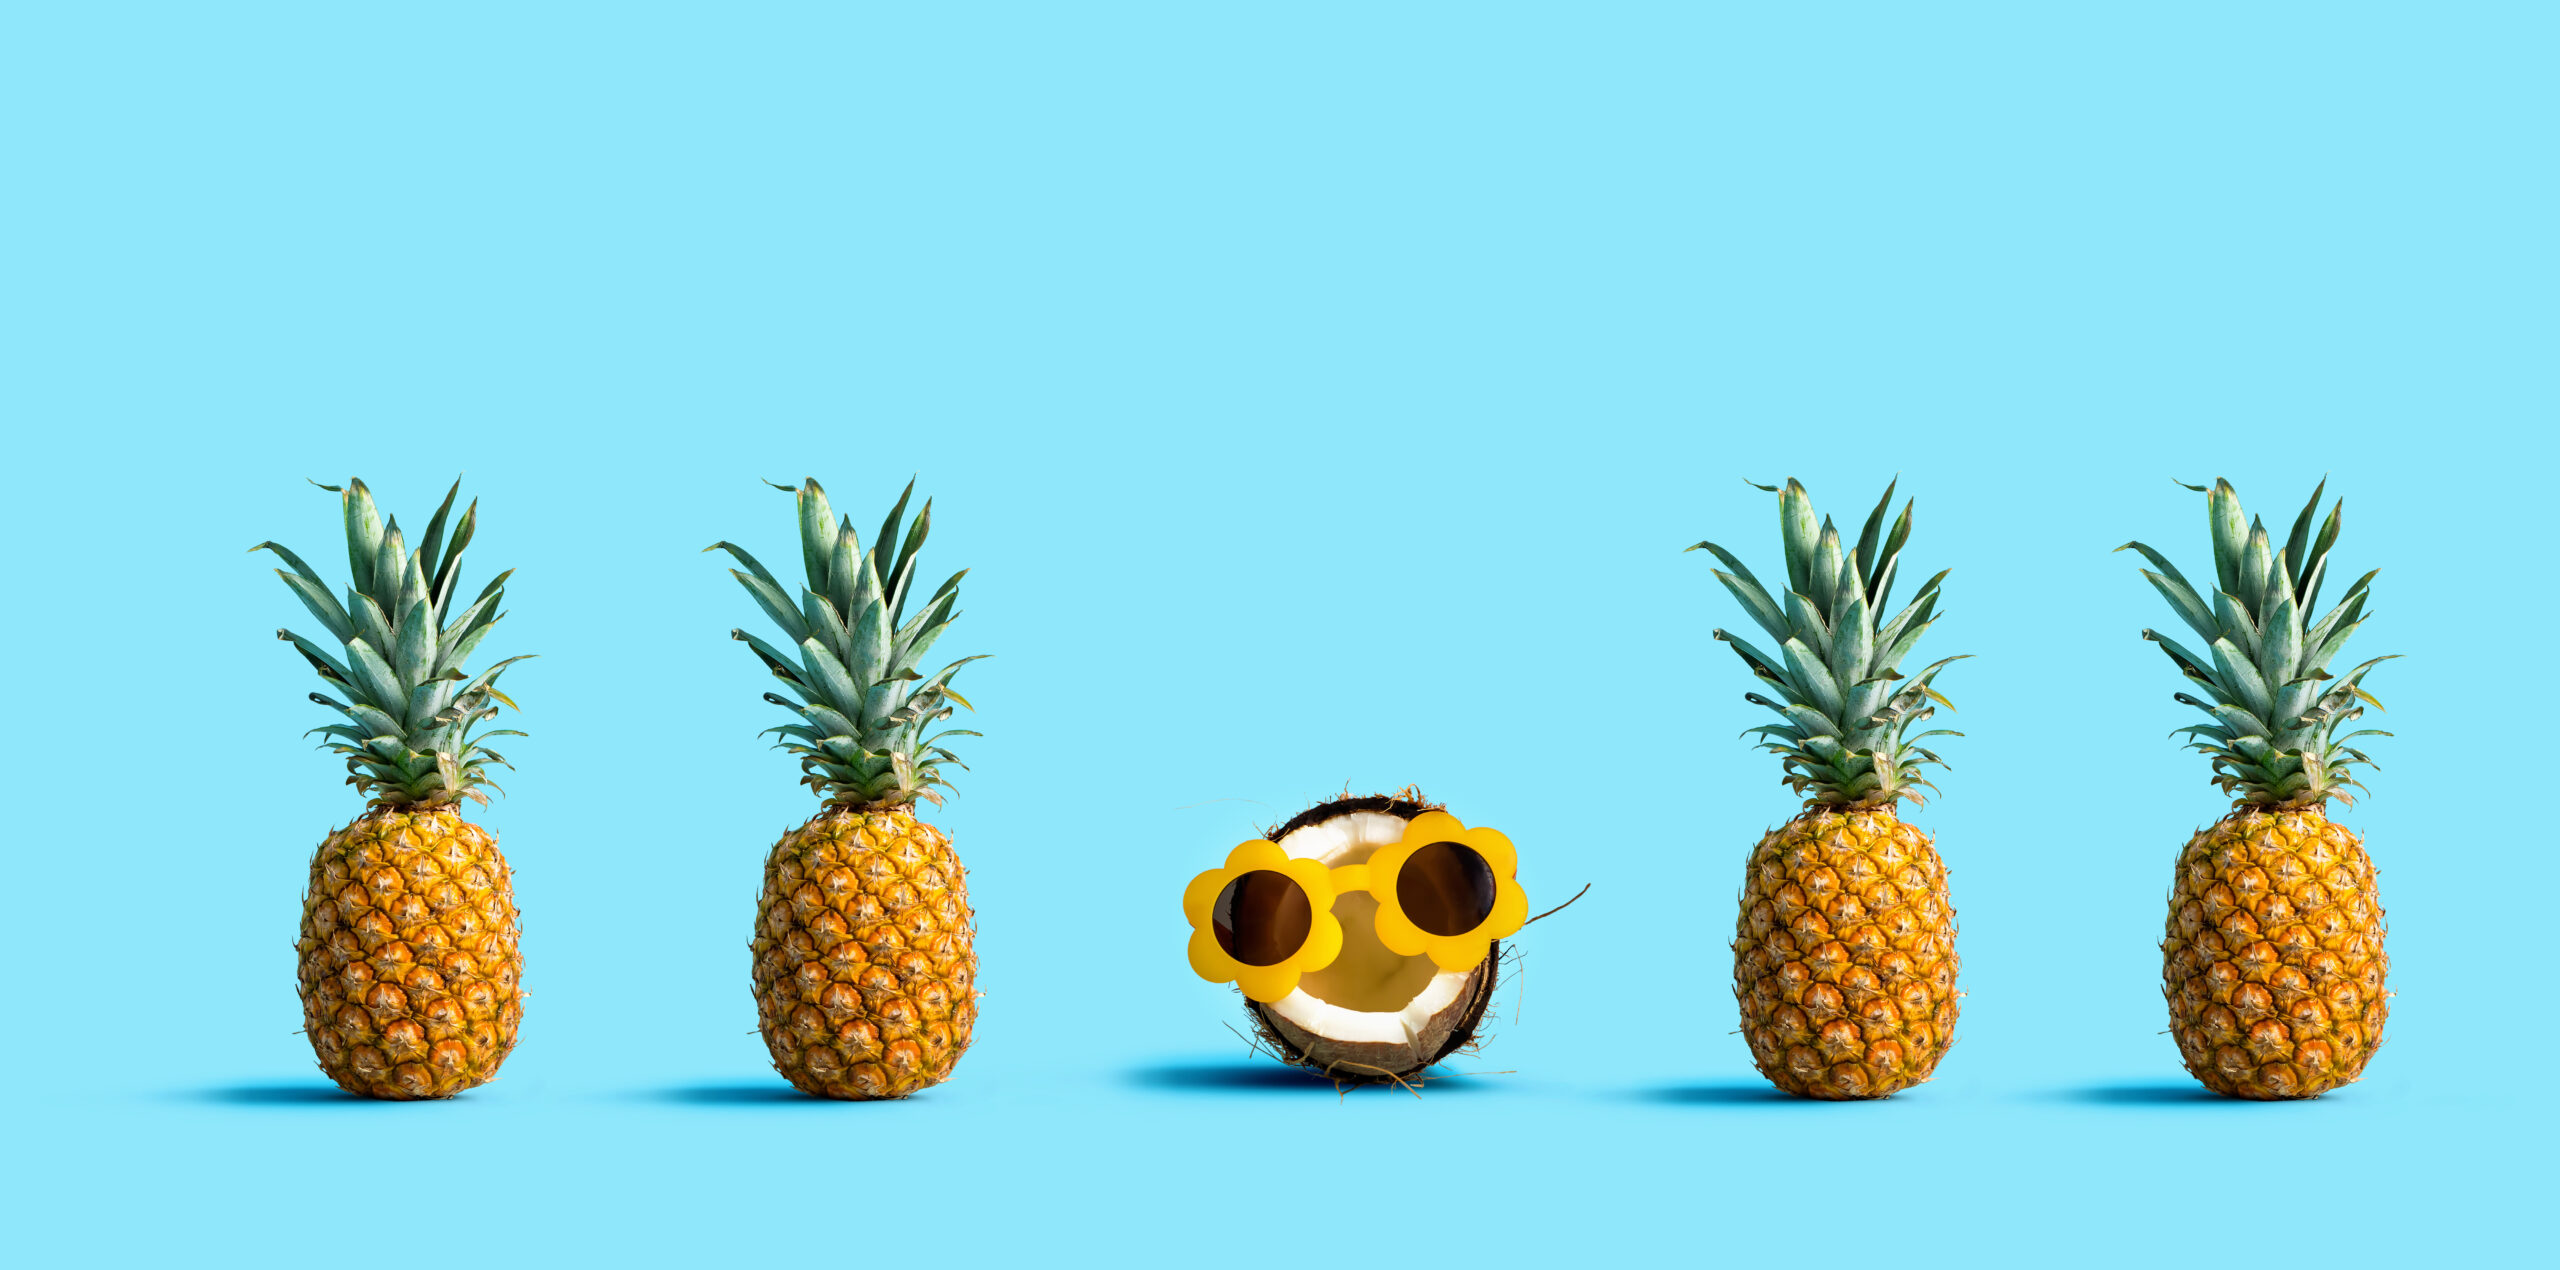 One out unique coconut wearing sunglasses with many pineapples